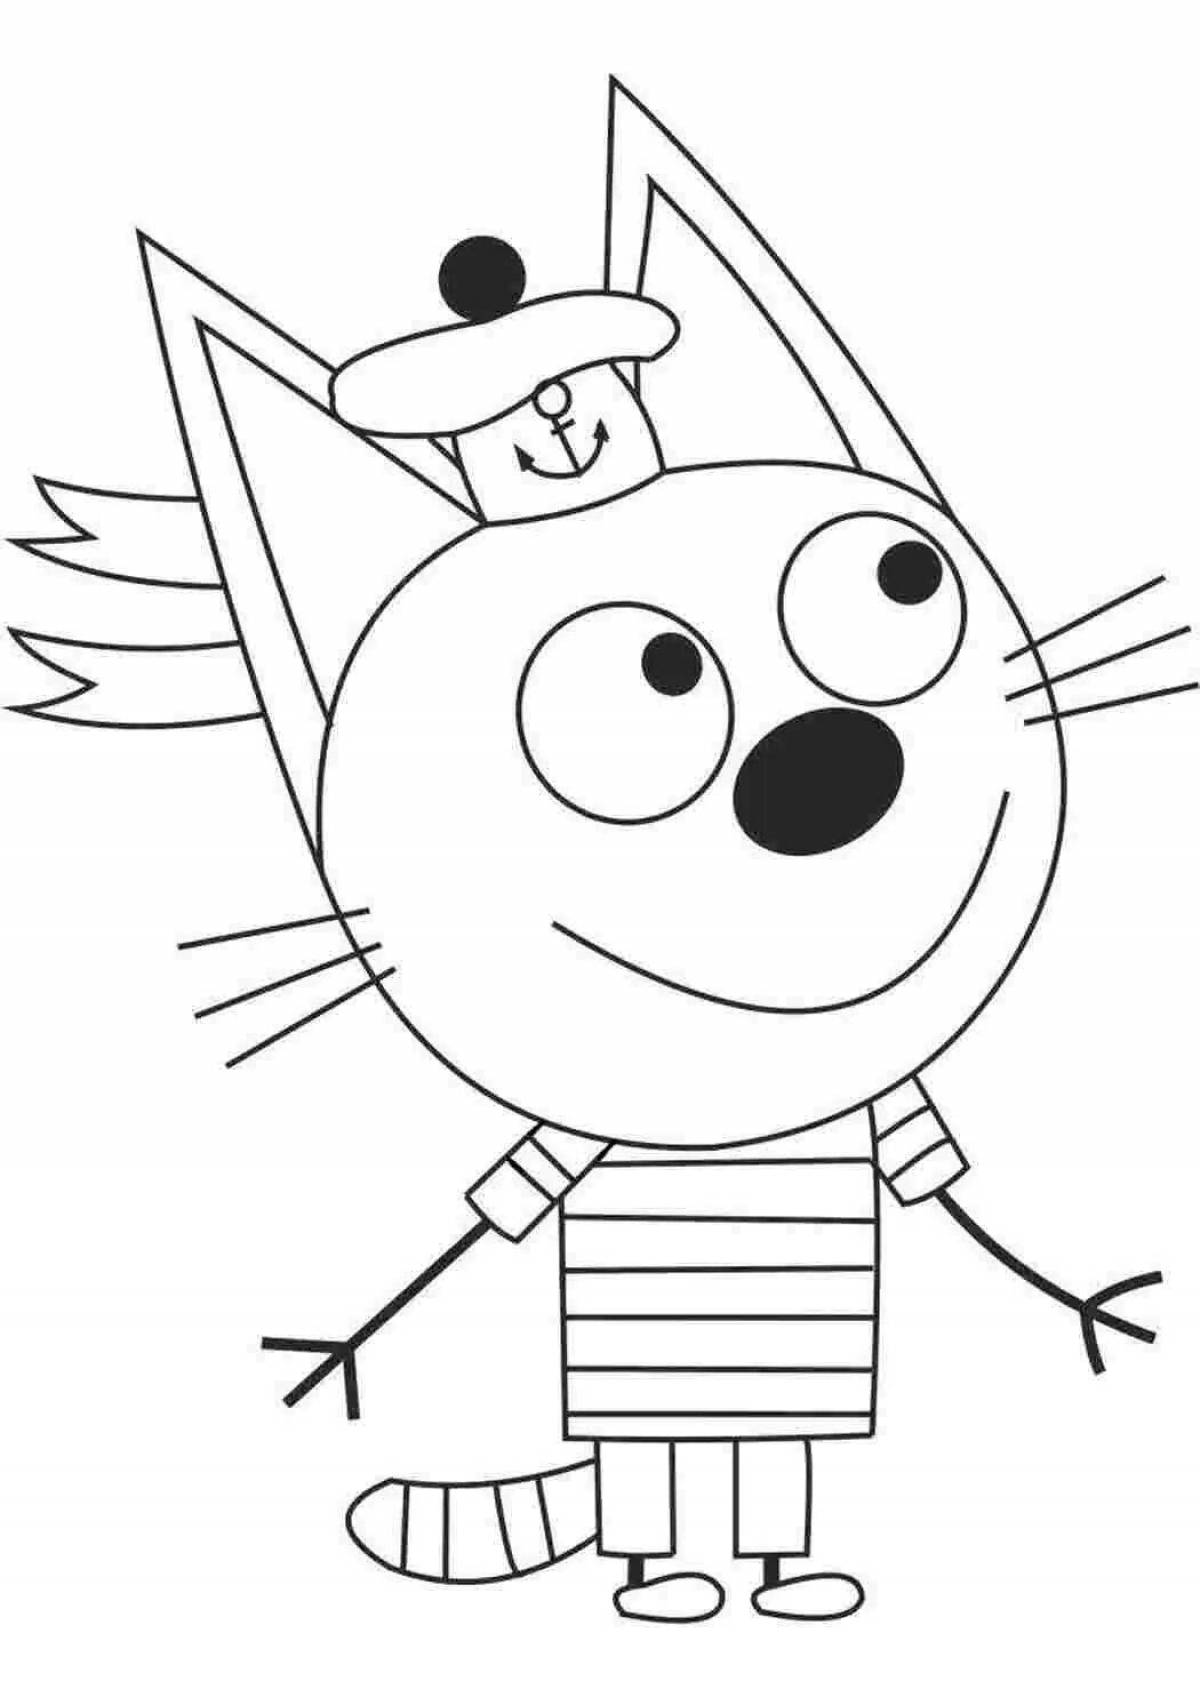 Excited shortbread coloring page for kids